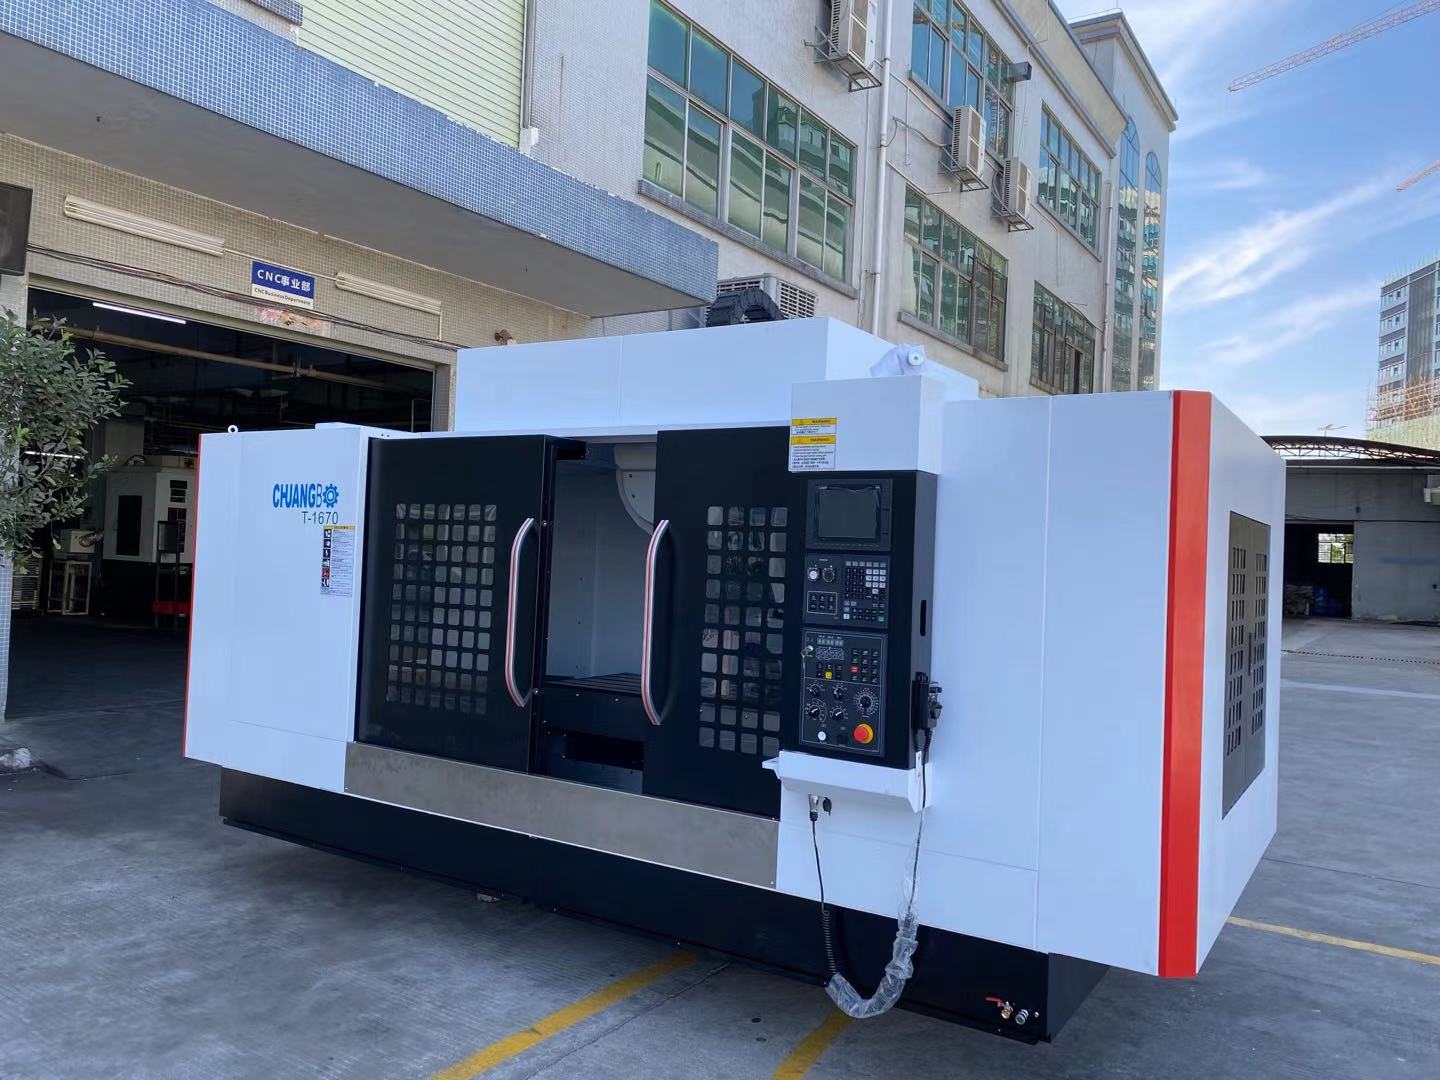 Goldconn Invested The New Cnc Machines To Meet Customer'S Requirement